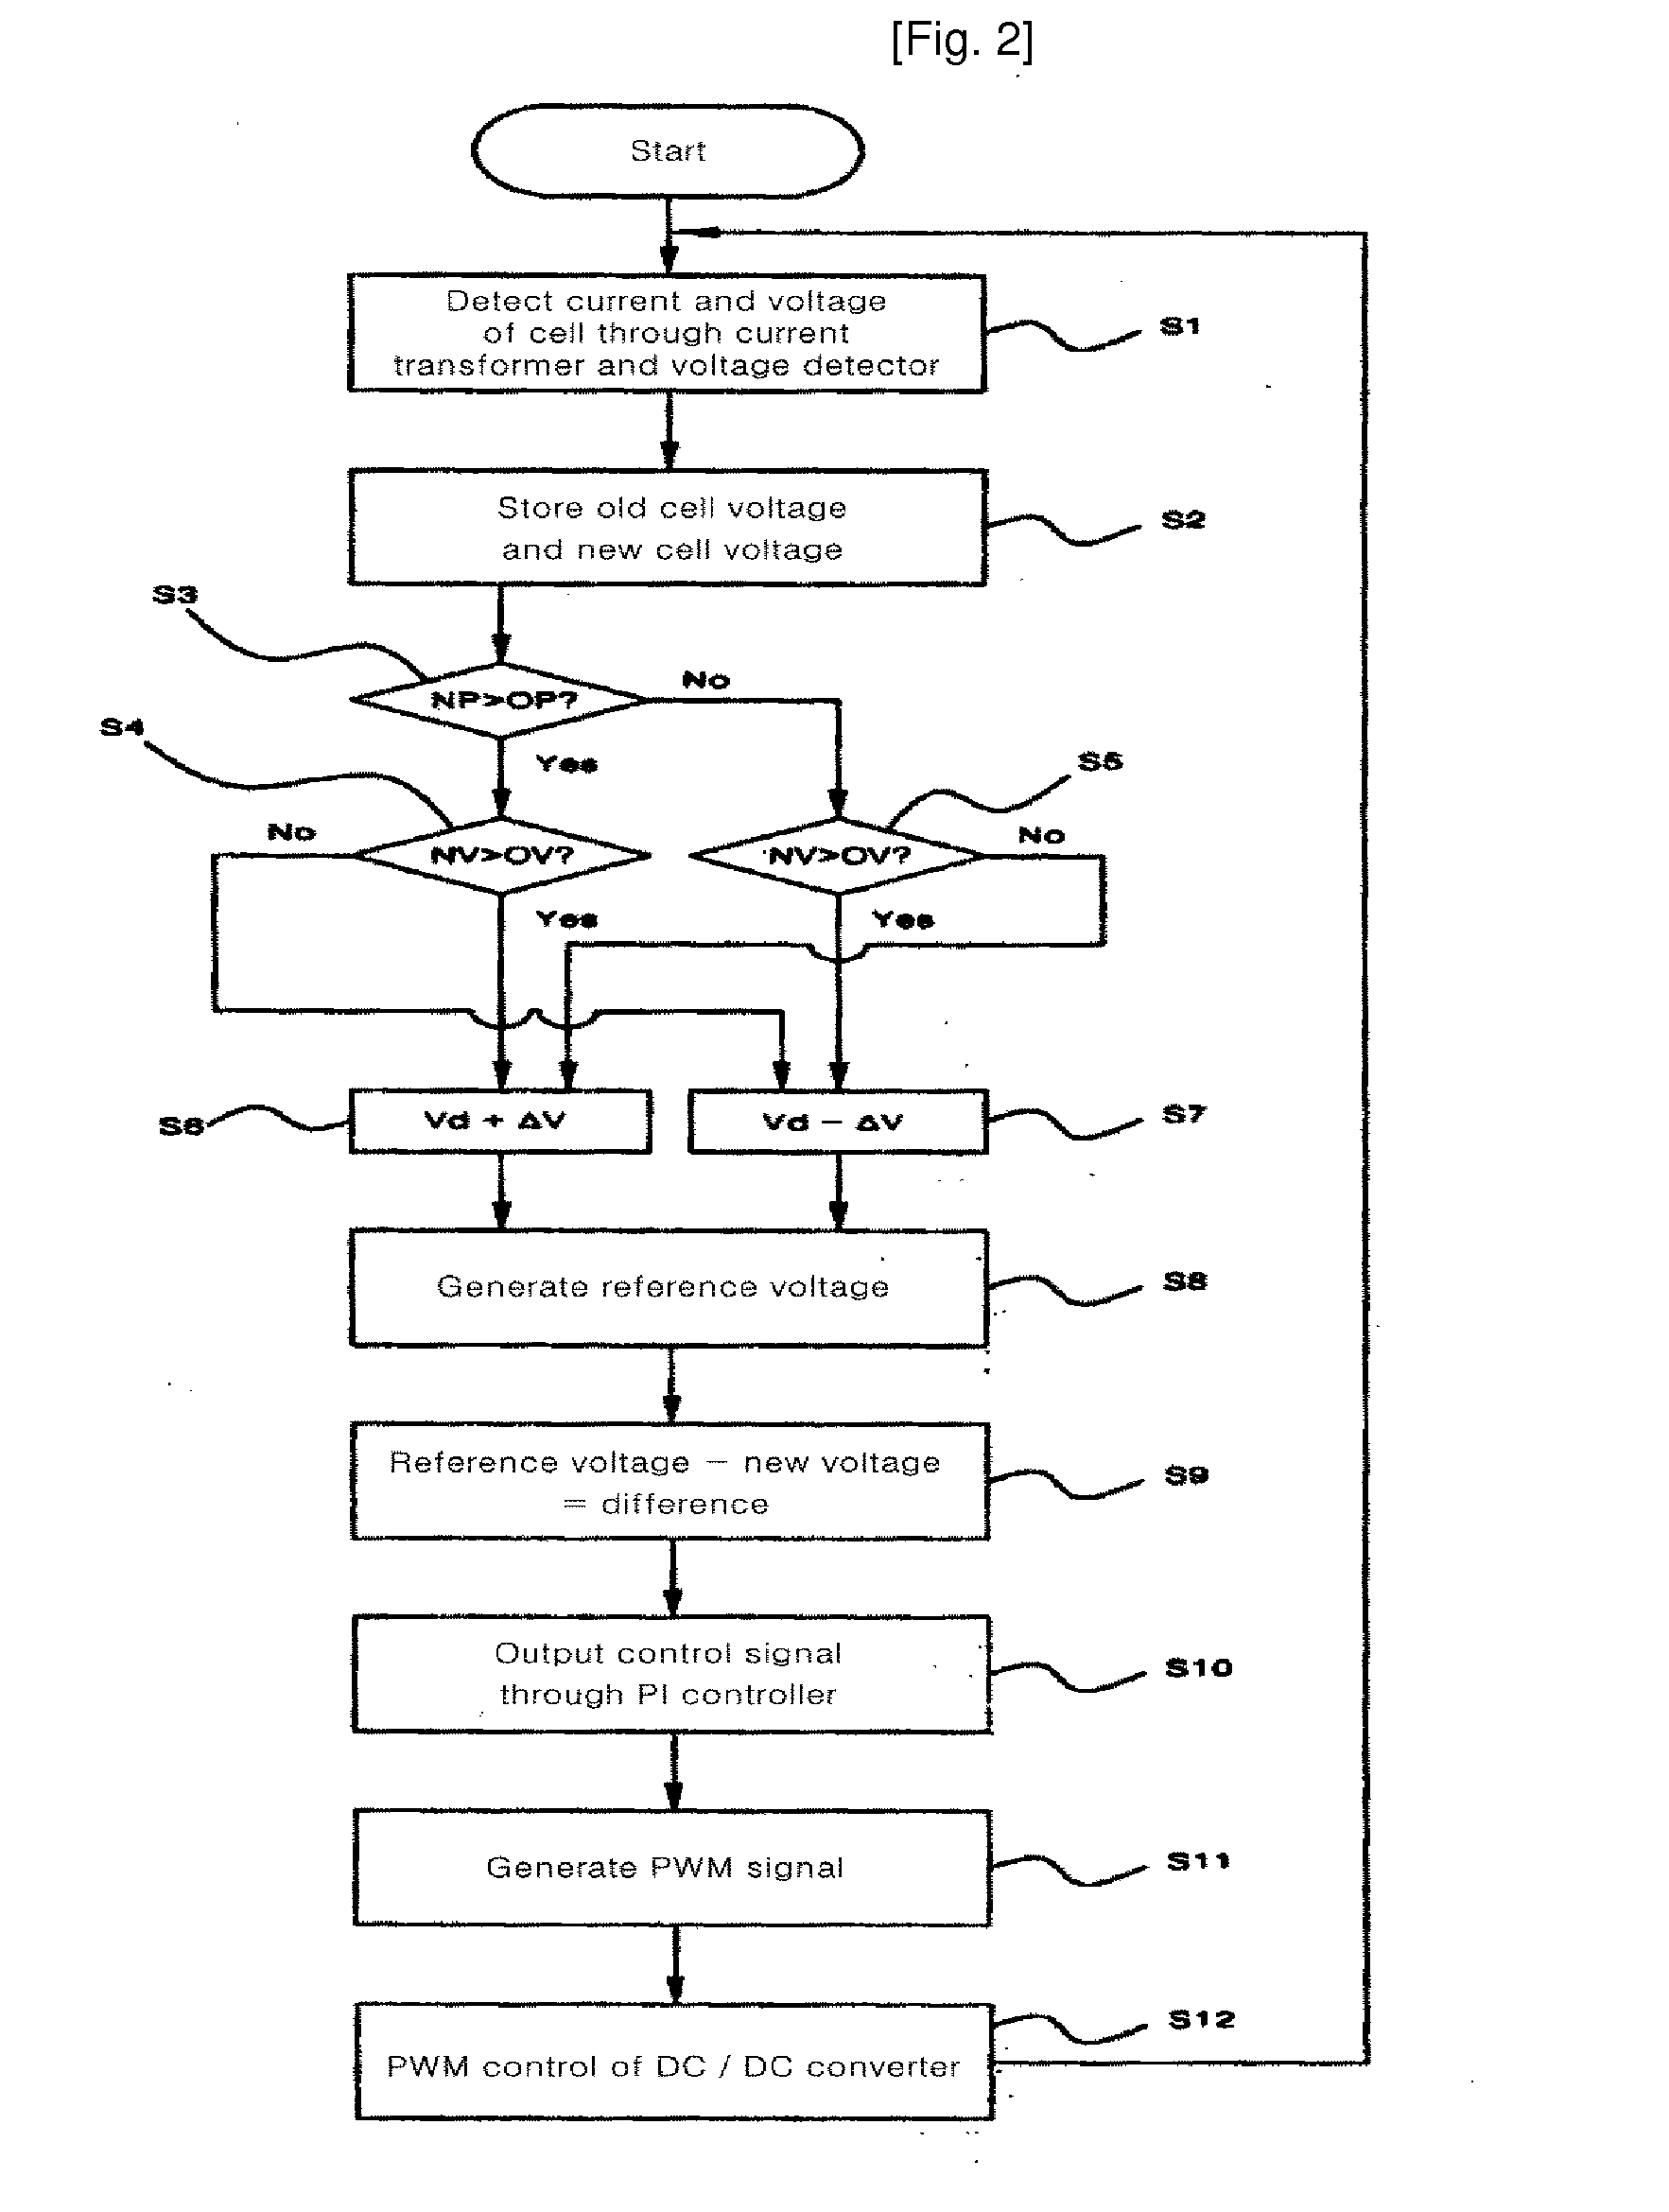 Controlling Apparatus of a Power Converter of Single-Phase Current For Photovoltaic Generation System